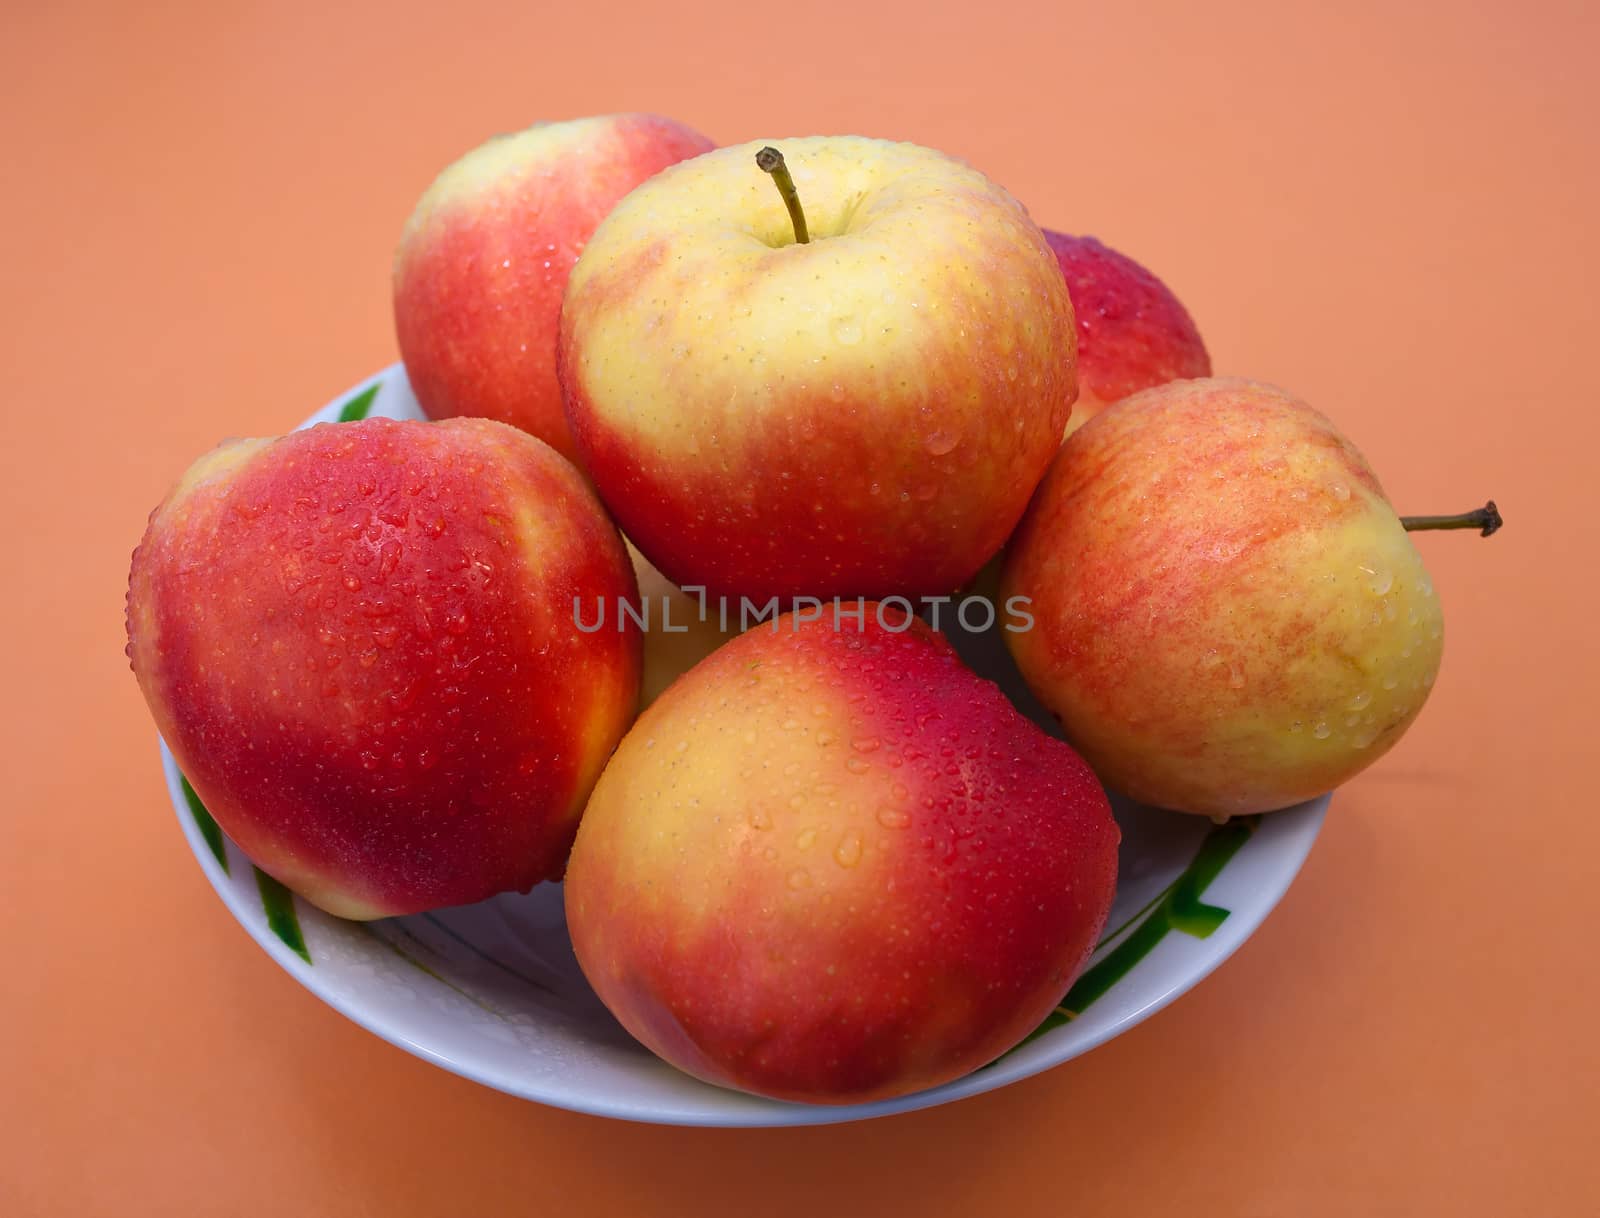 Apples in a plate by Krakatuk